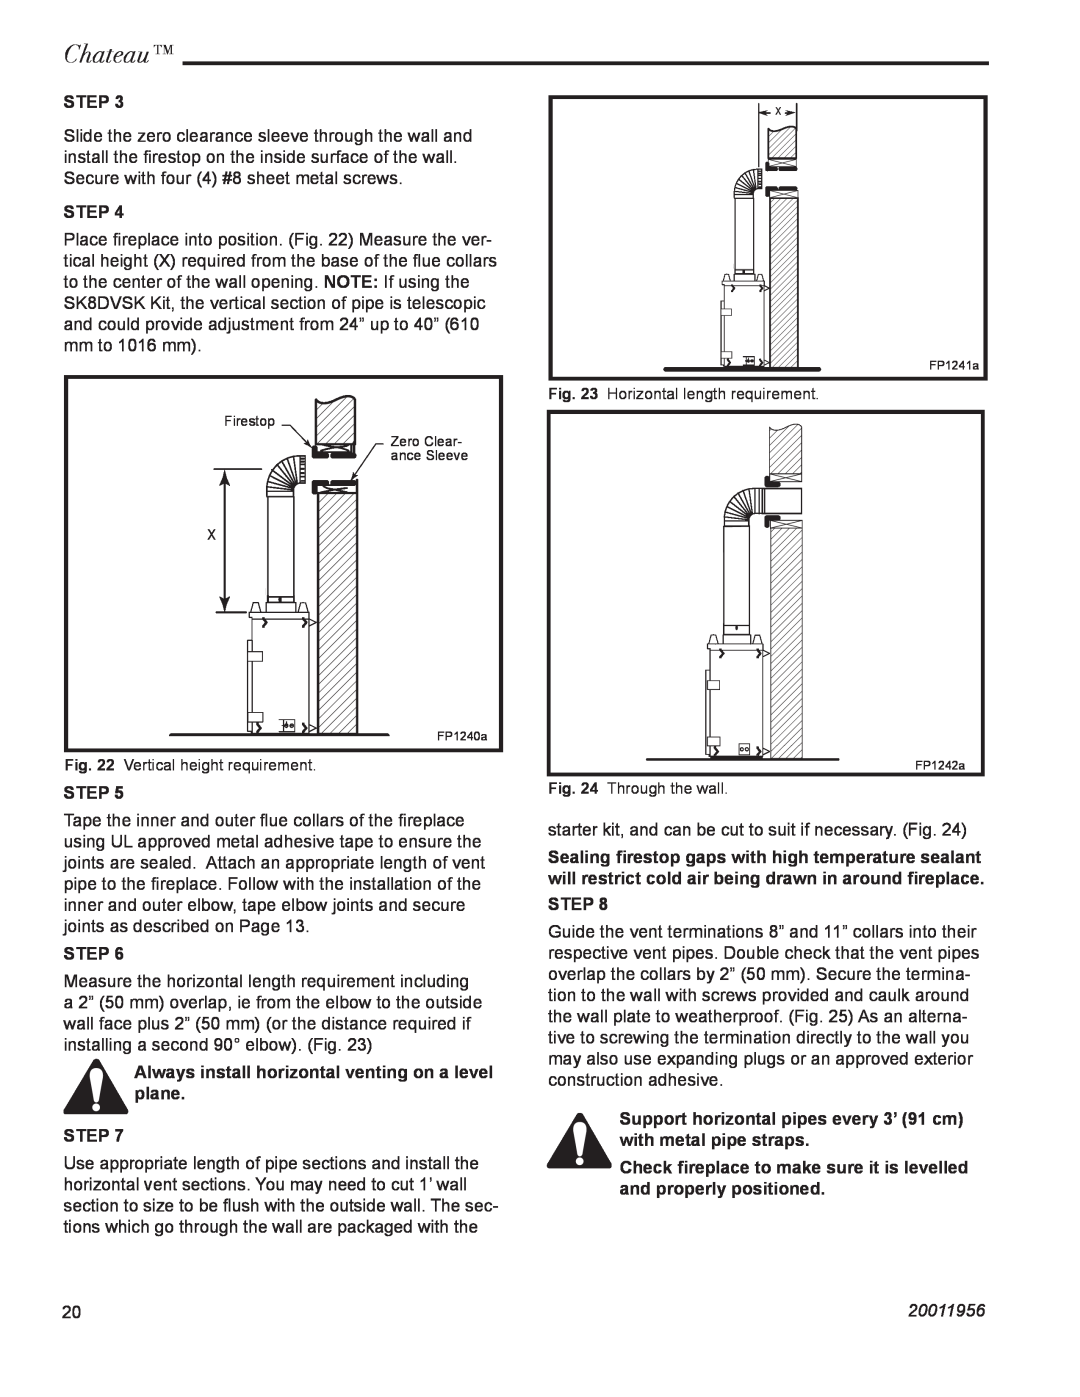 CFM Corporation DVT44IN, DVT38IN installation instructions Chateau, Step, 20011956 